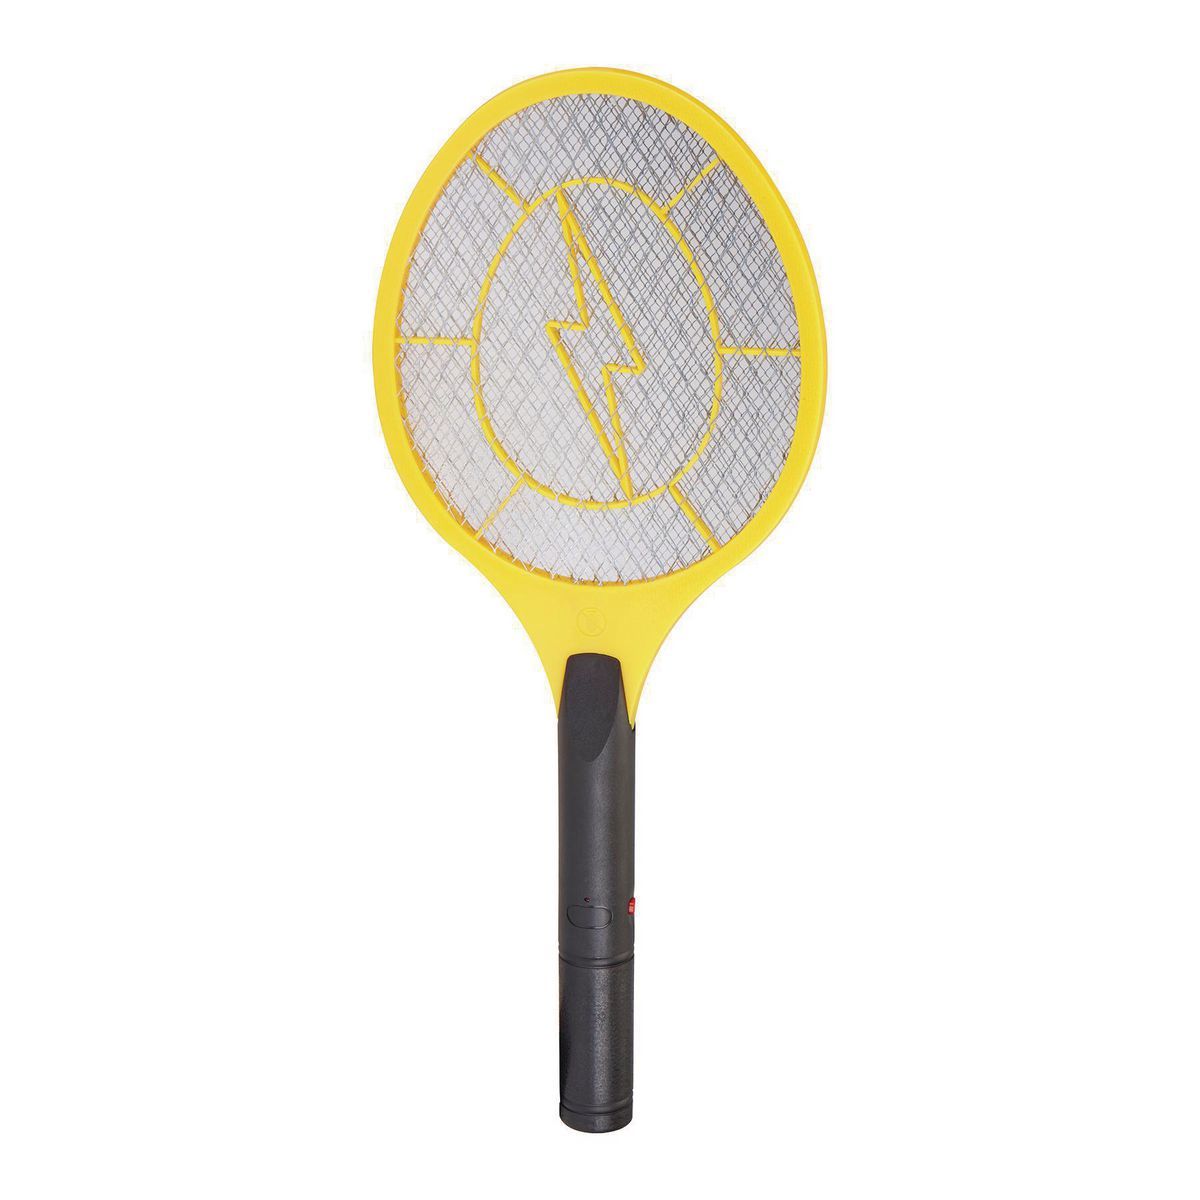 MR. BAR-B-Q Electronic Fly & Insect Swatter